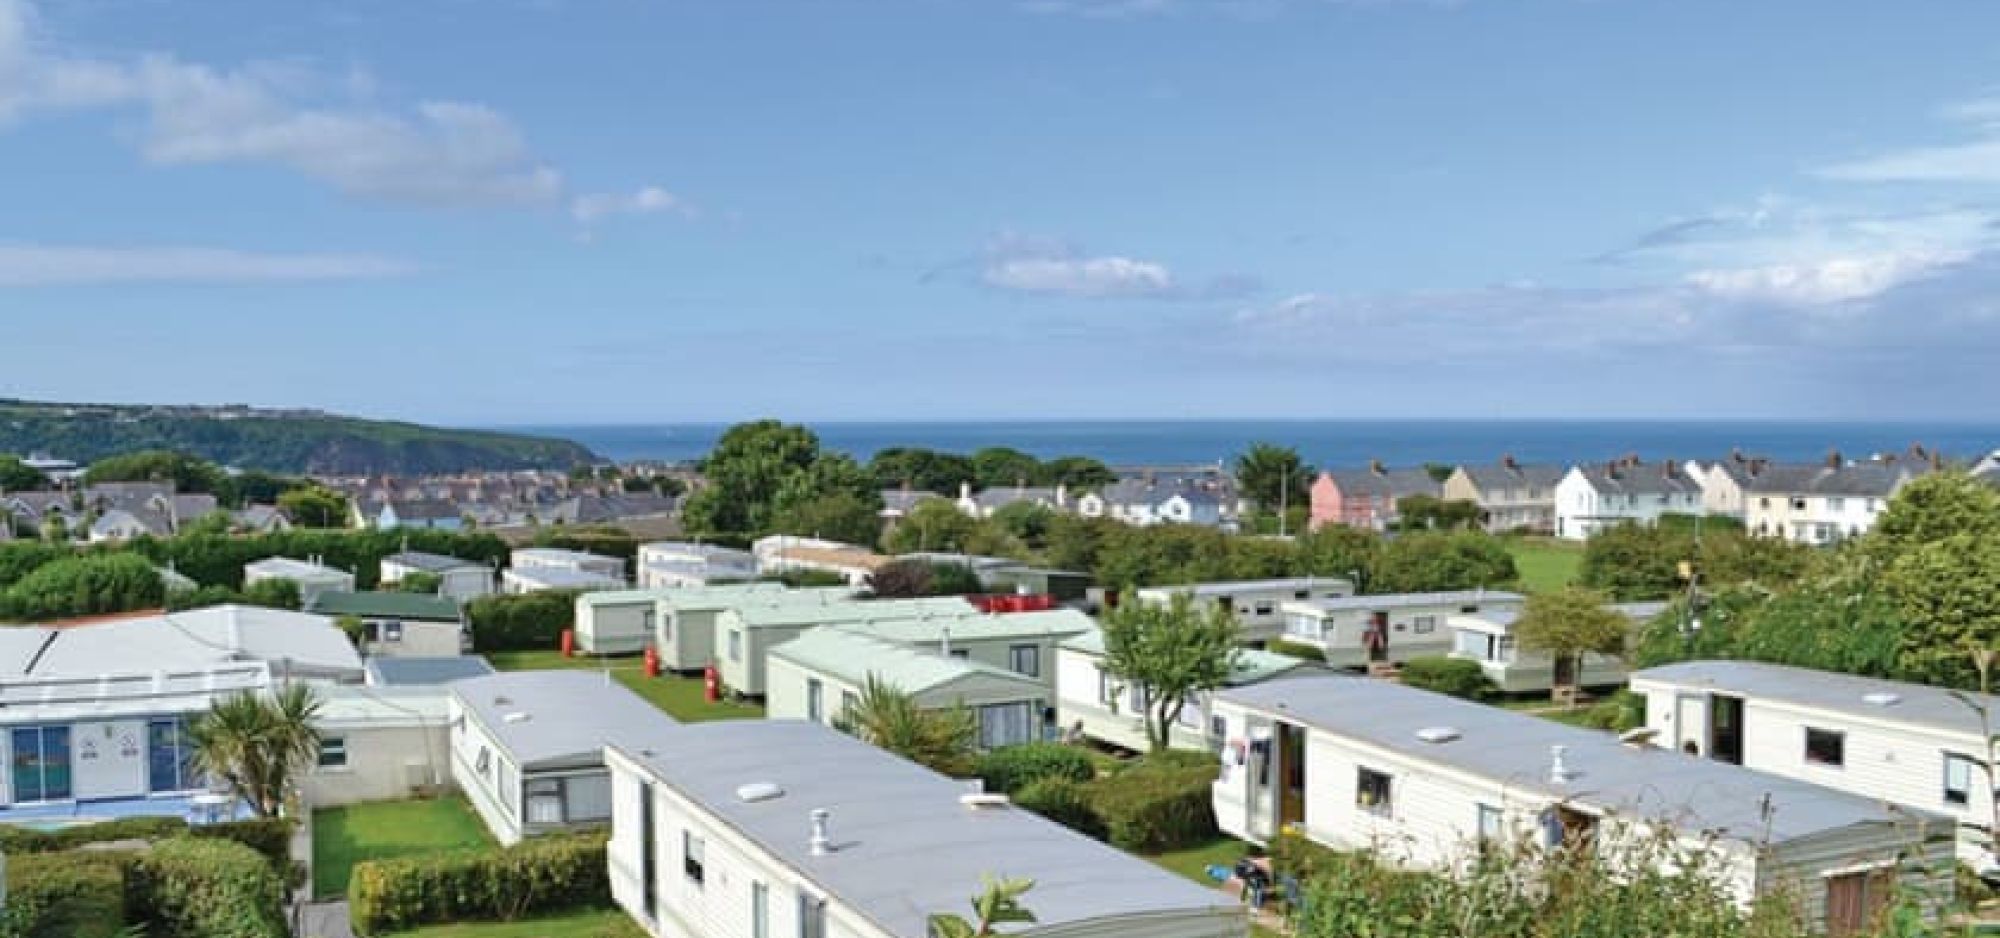 The view from Fishguard Holiday Park towards the coast